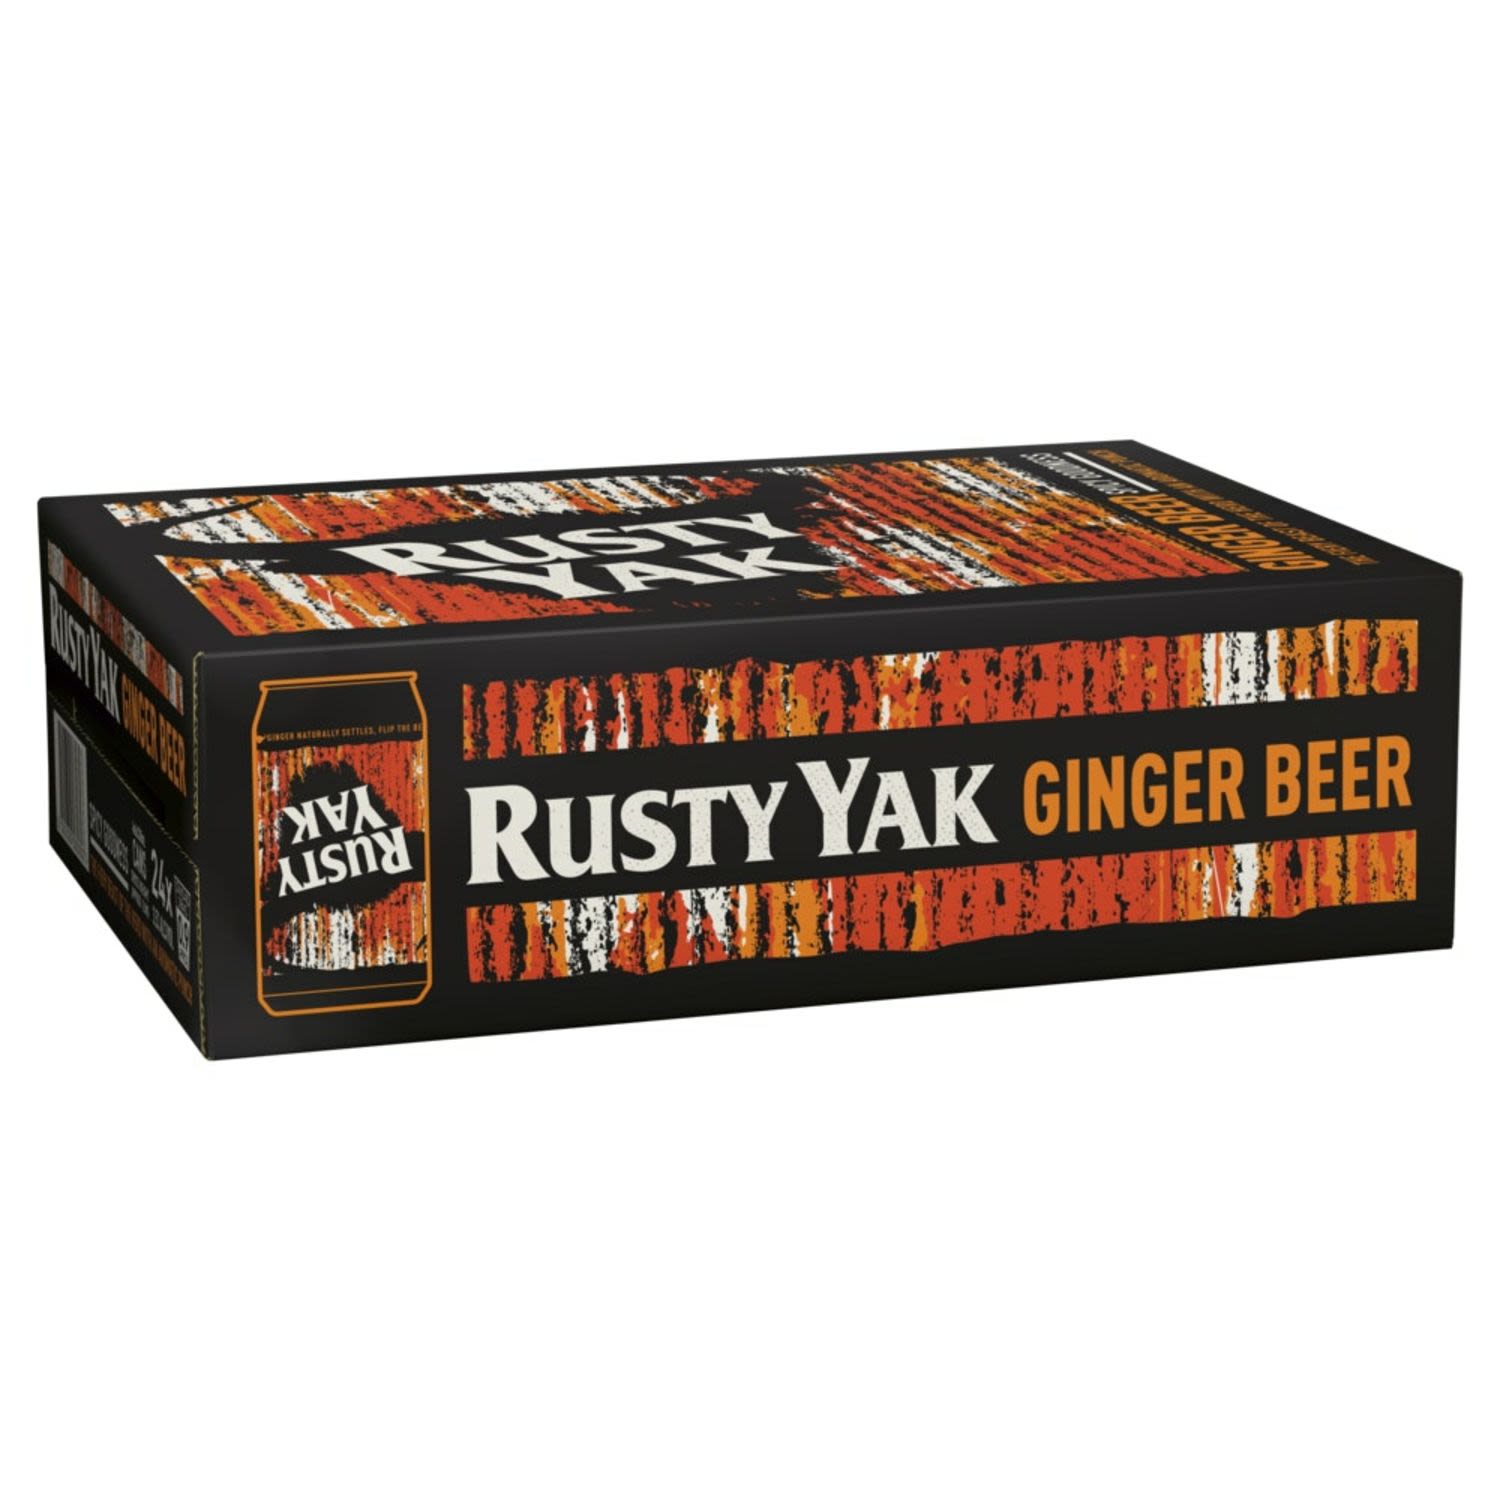 Matilda Bay Rusty Yak Ginger Beer Cans 330mL 24 Pack